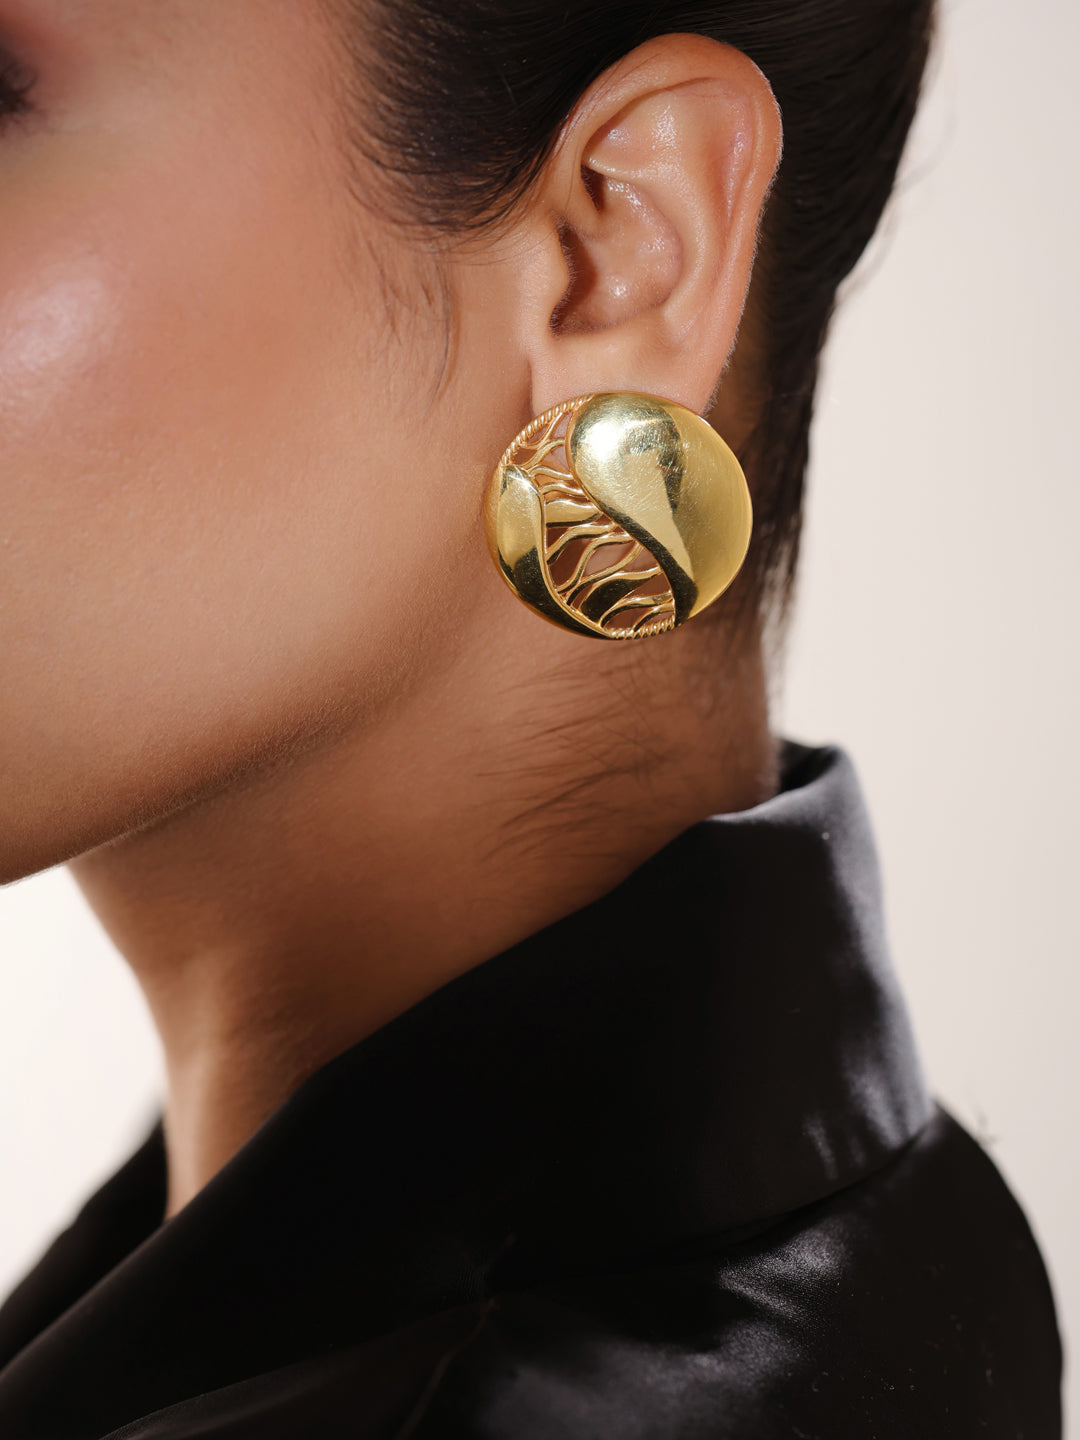 24K Gold Plated Jali Design Lumina Collection Earrings